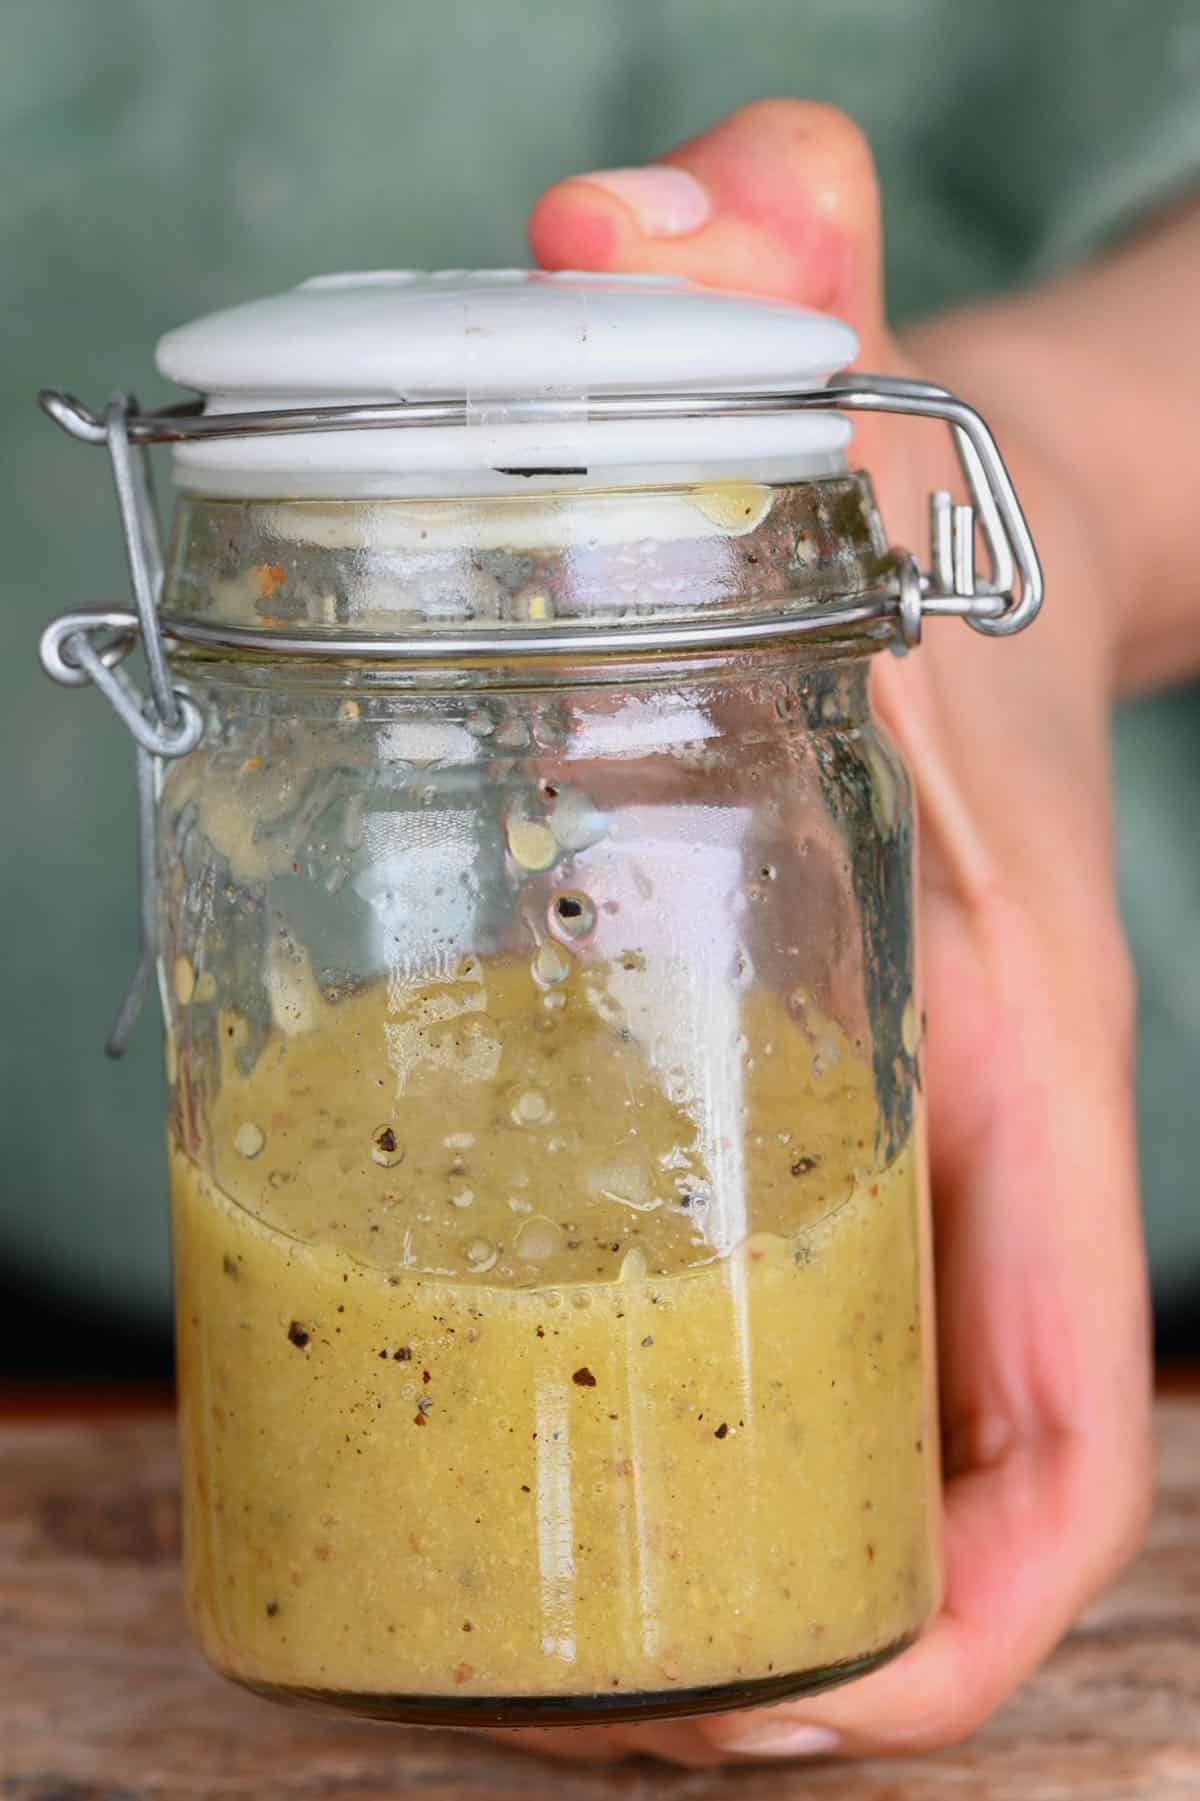 Mixed salad dressing in a small jar